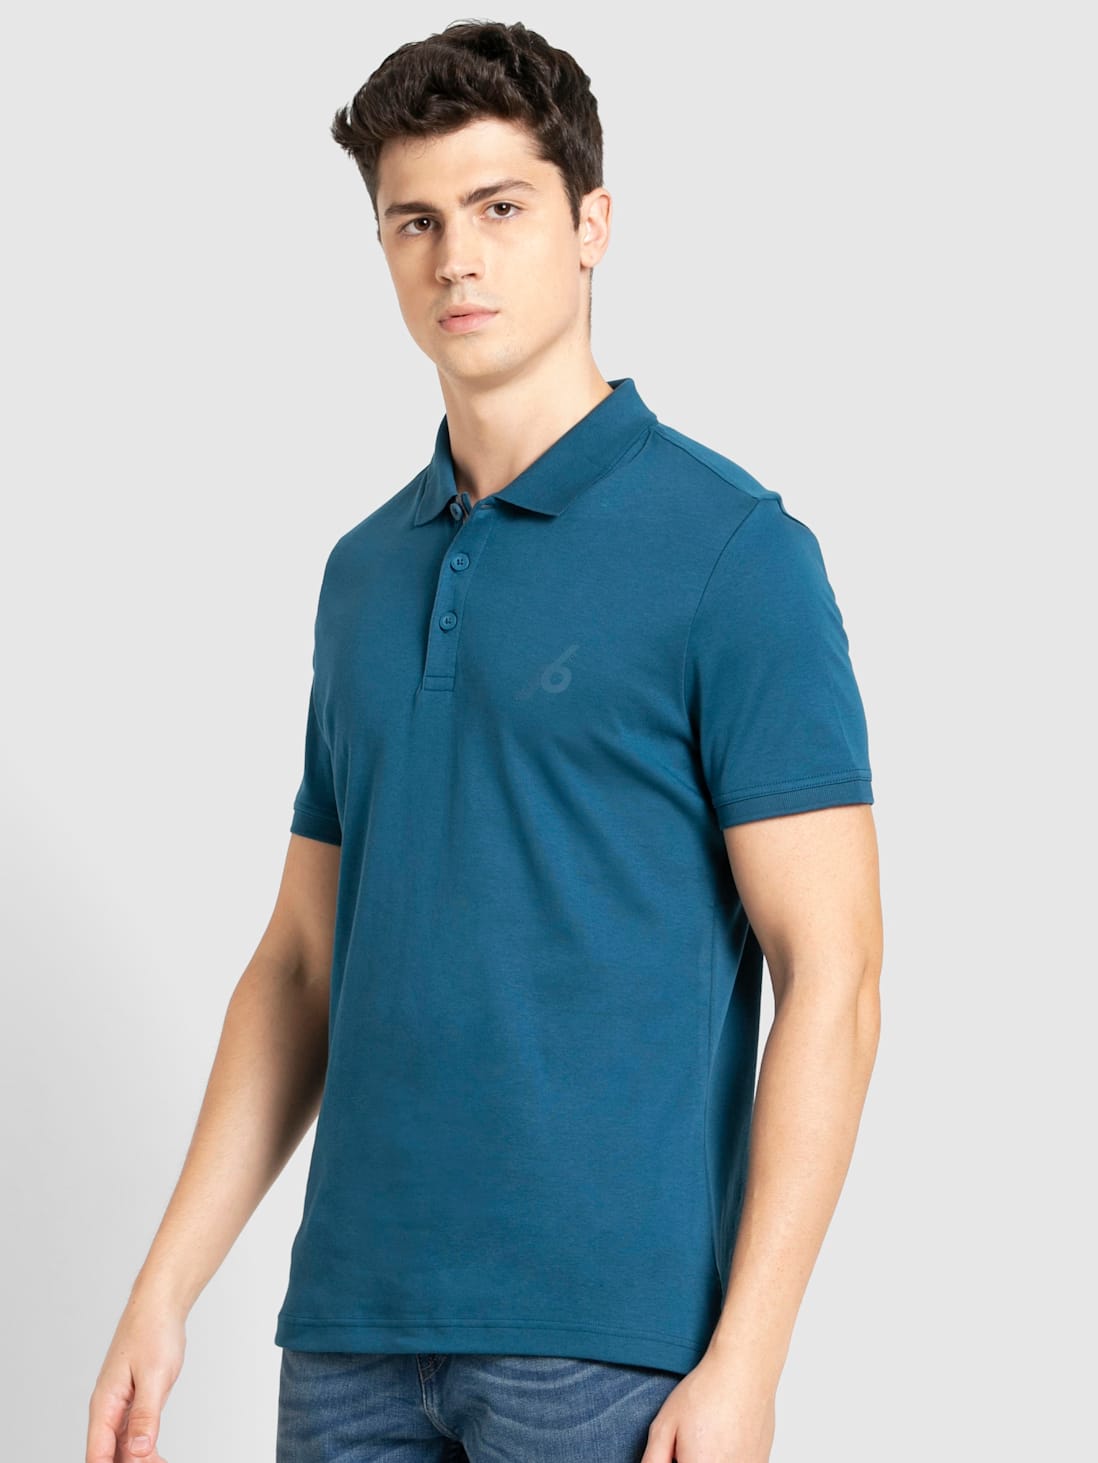 Seaport Teal Solid Half Sleeve Polo Sports T-Shirt for Men 3911 ...